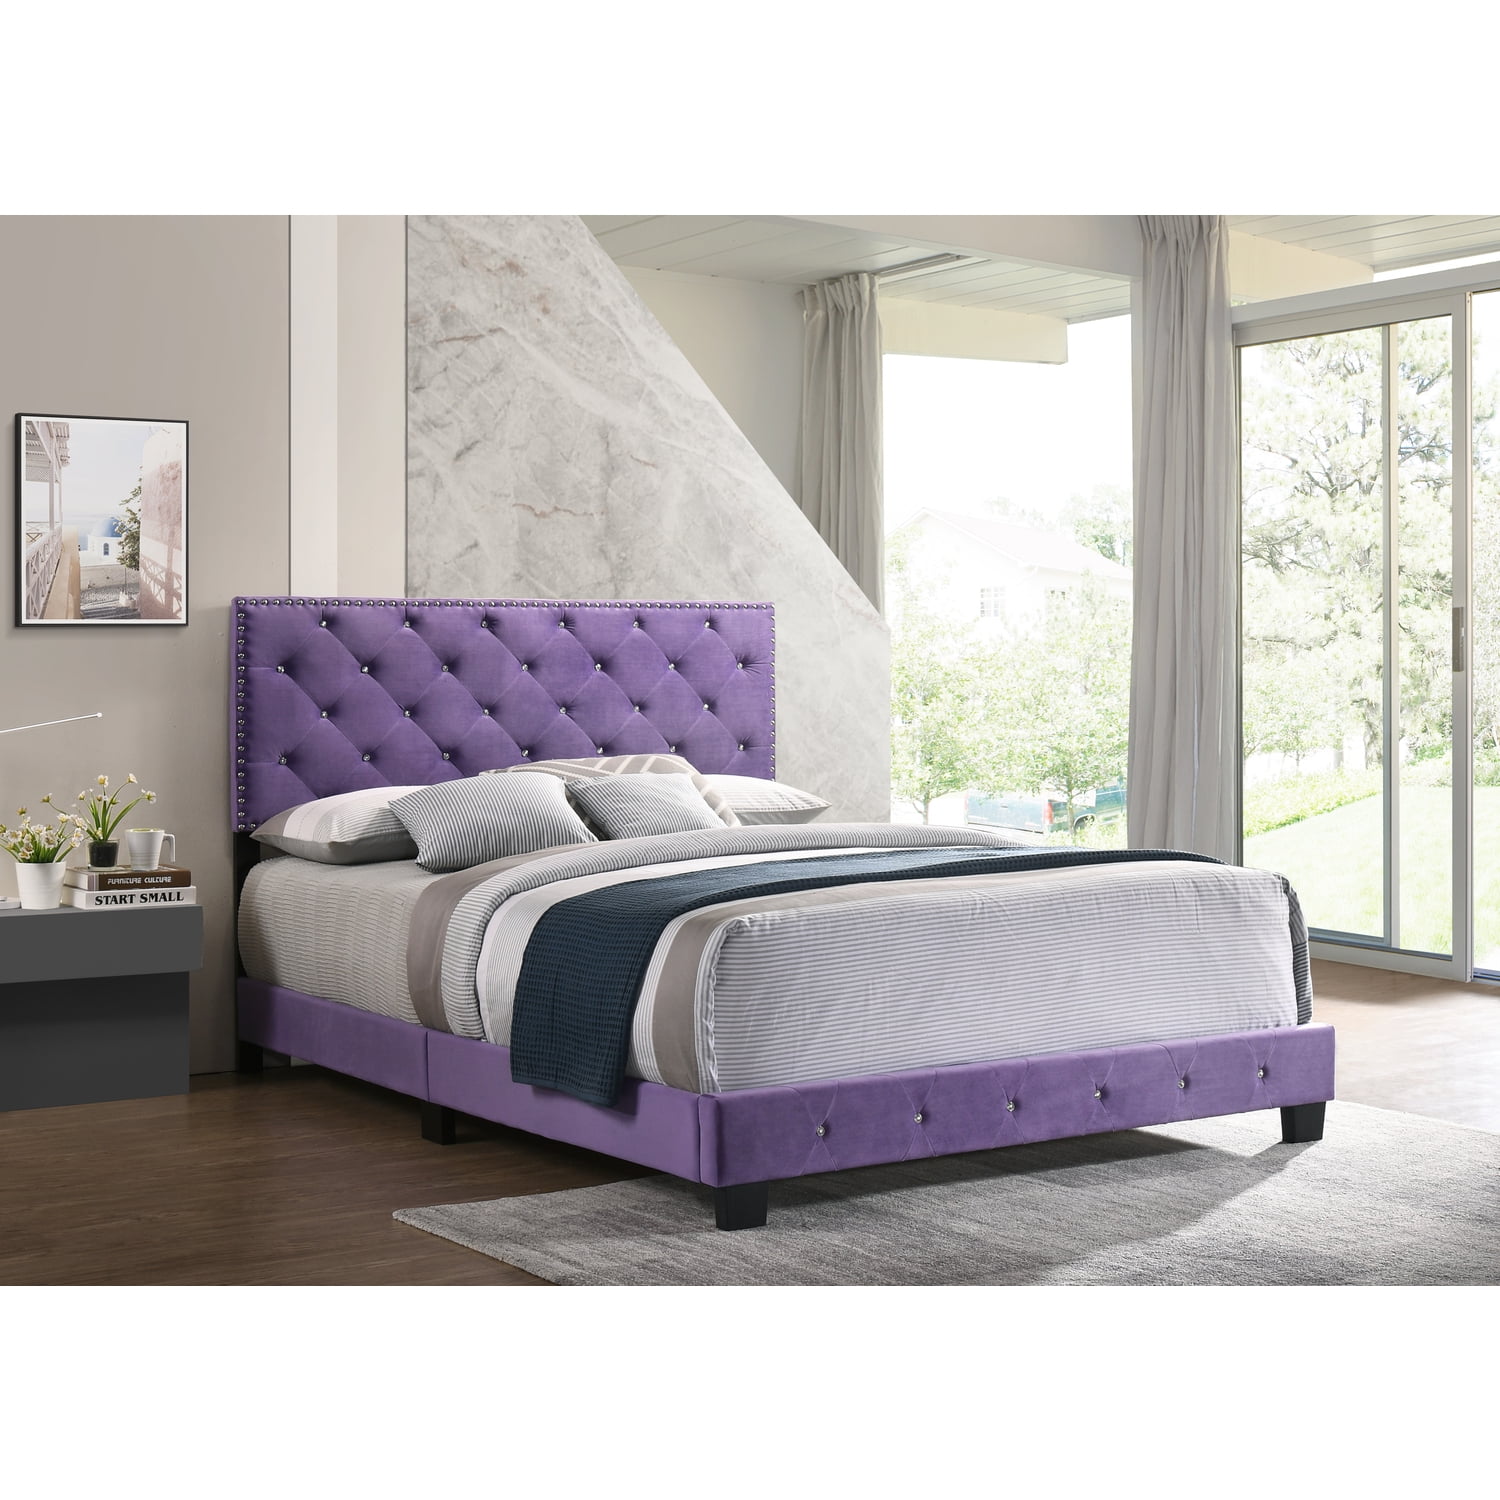 Glory Furniture Suffolk G1402 Qb Up, How To Put Together Purple Bed Frame